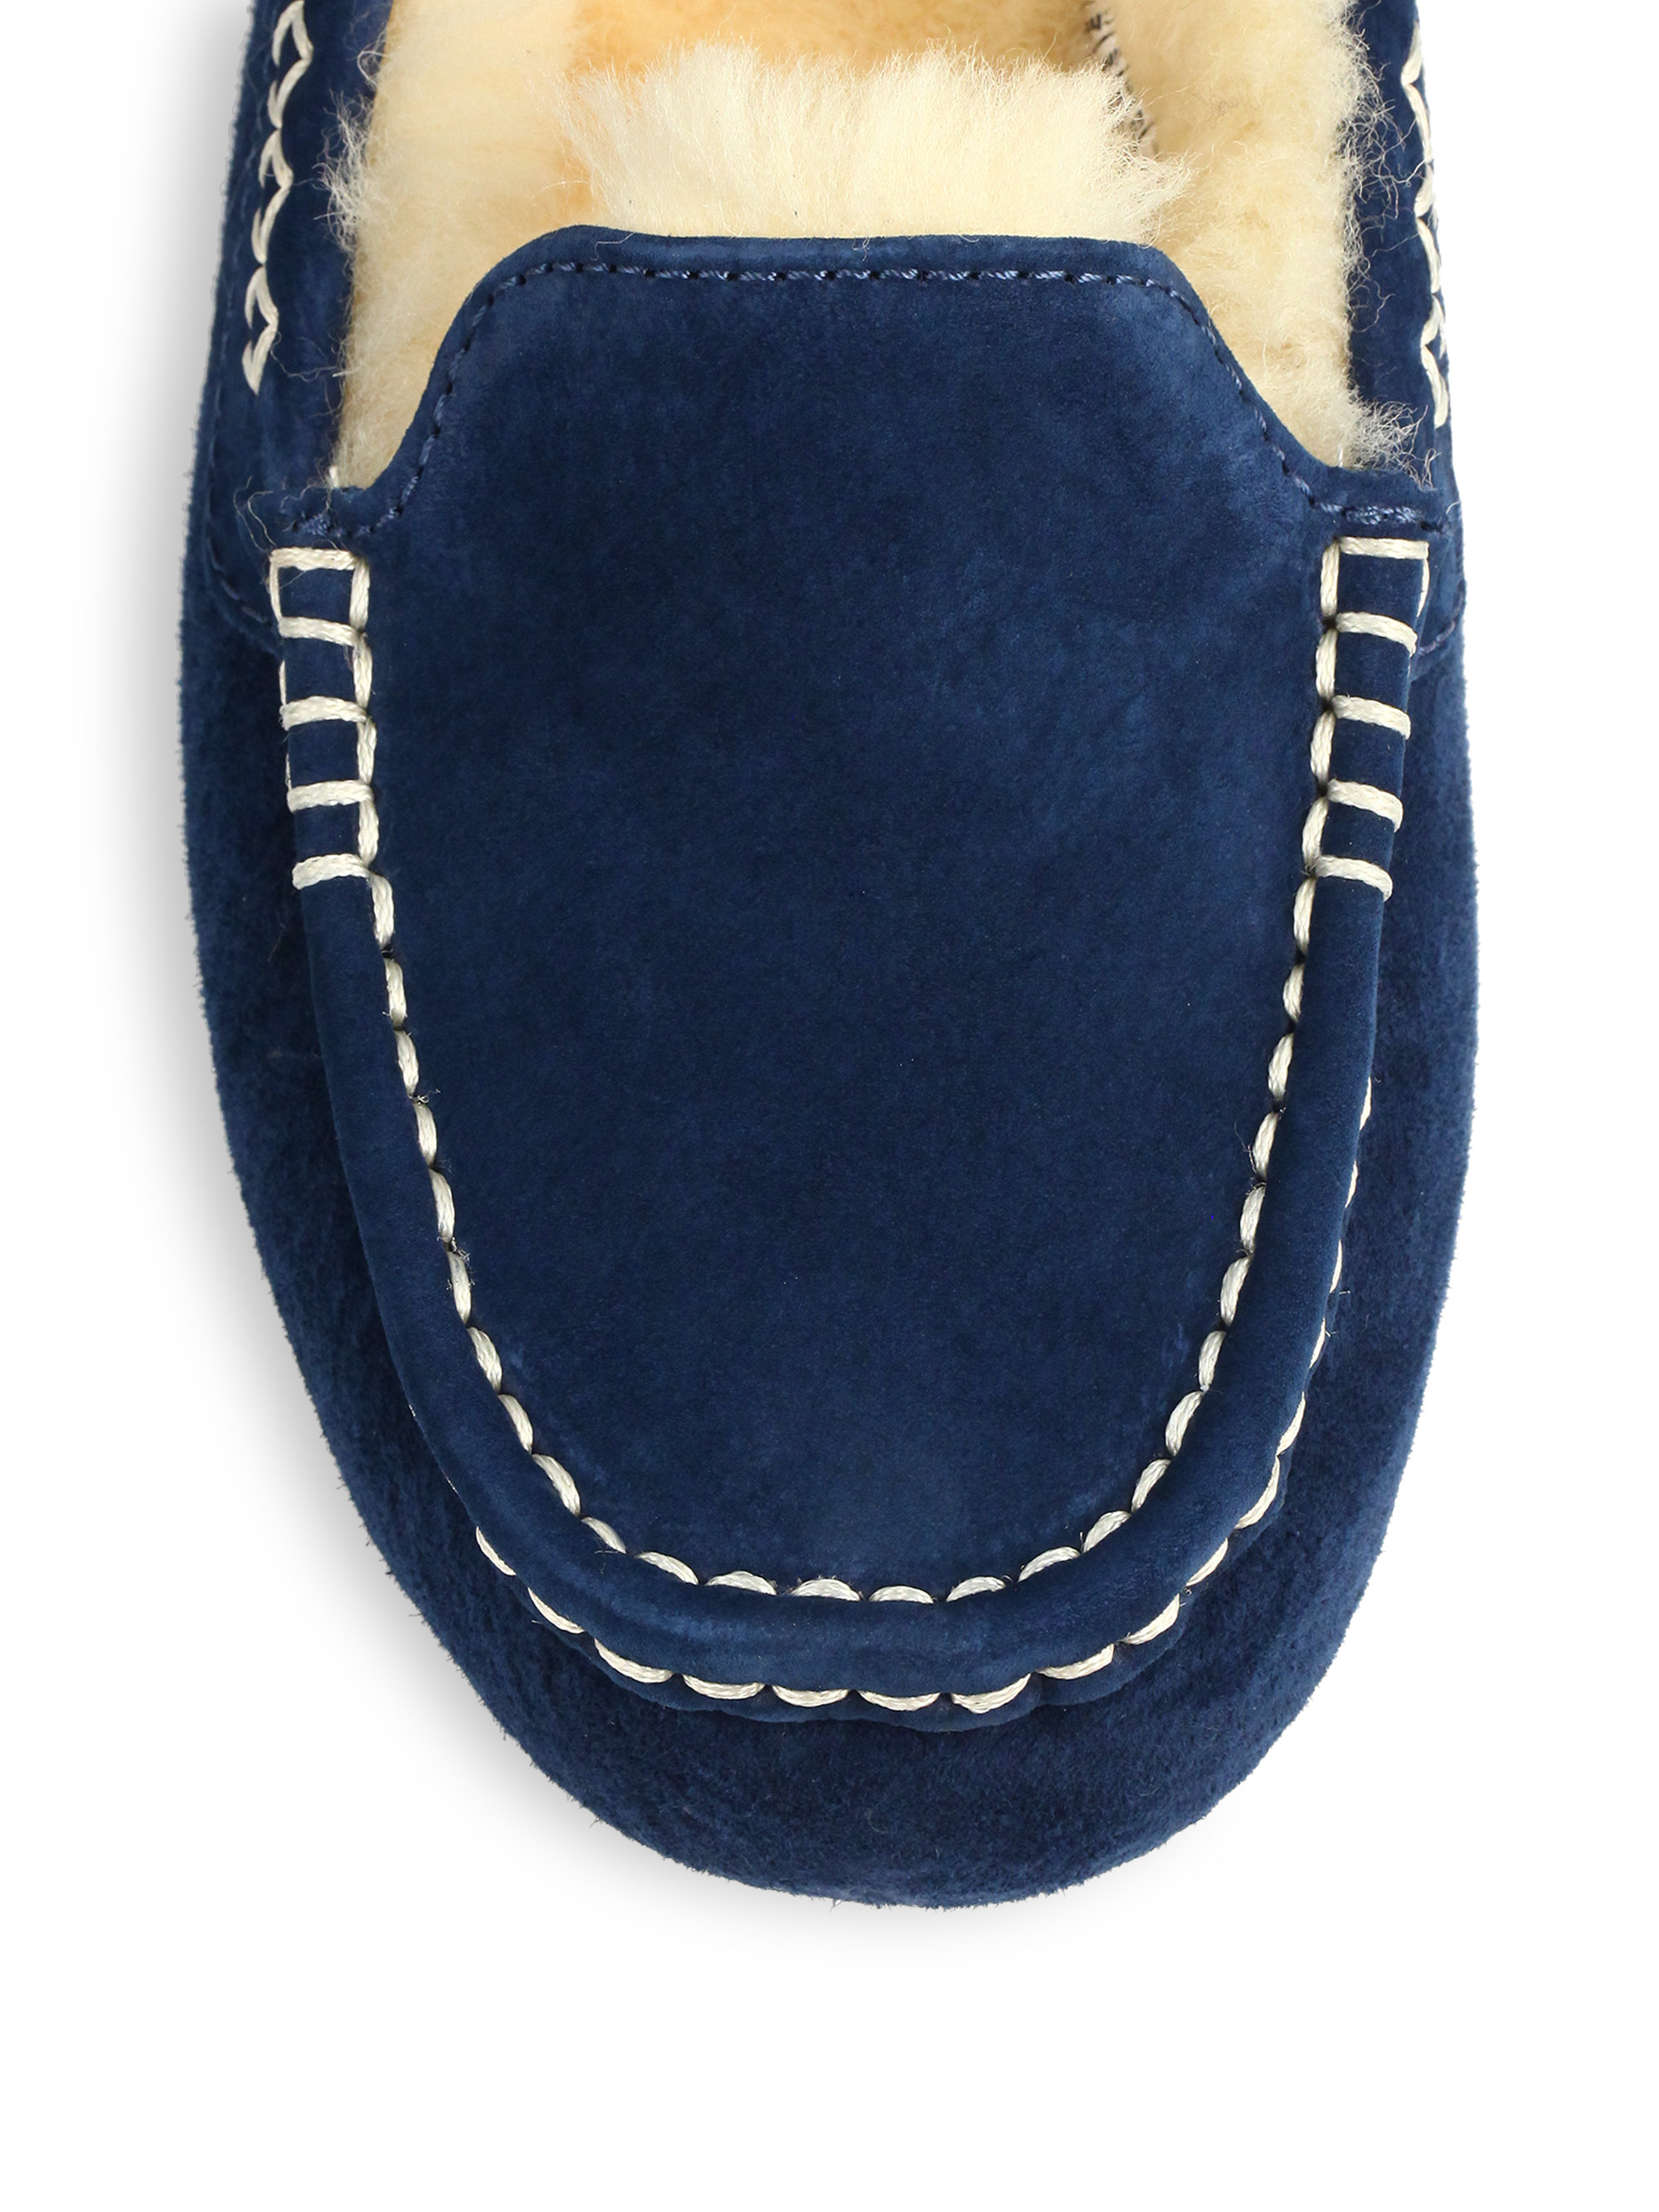 womens ugg ansley slippers